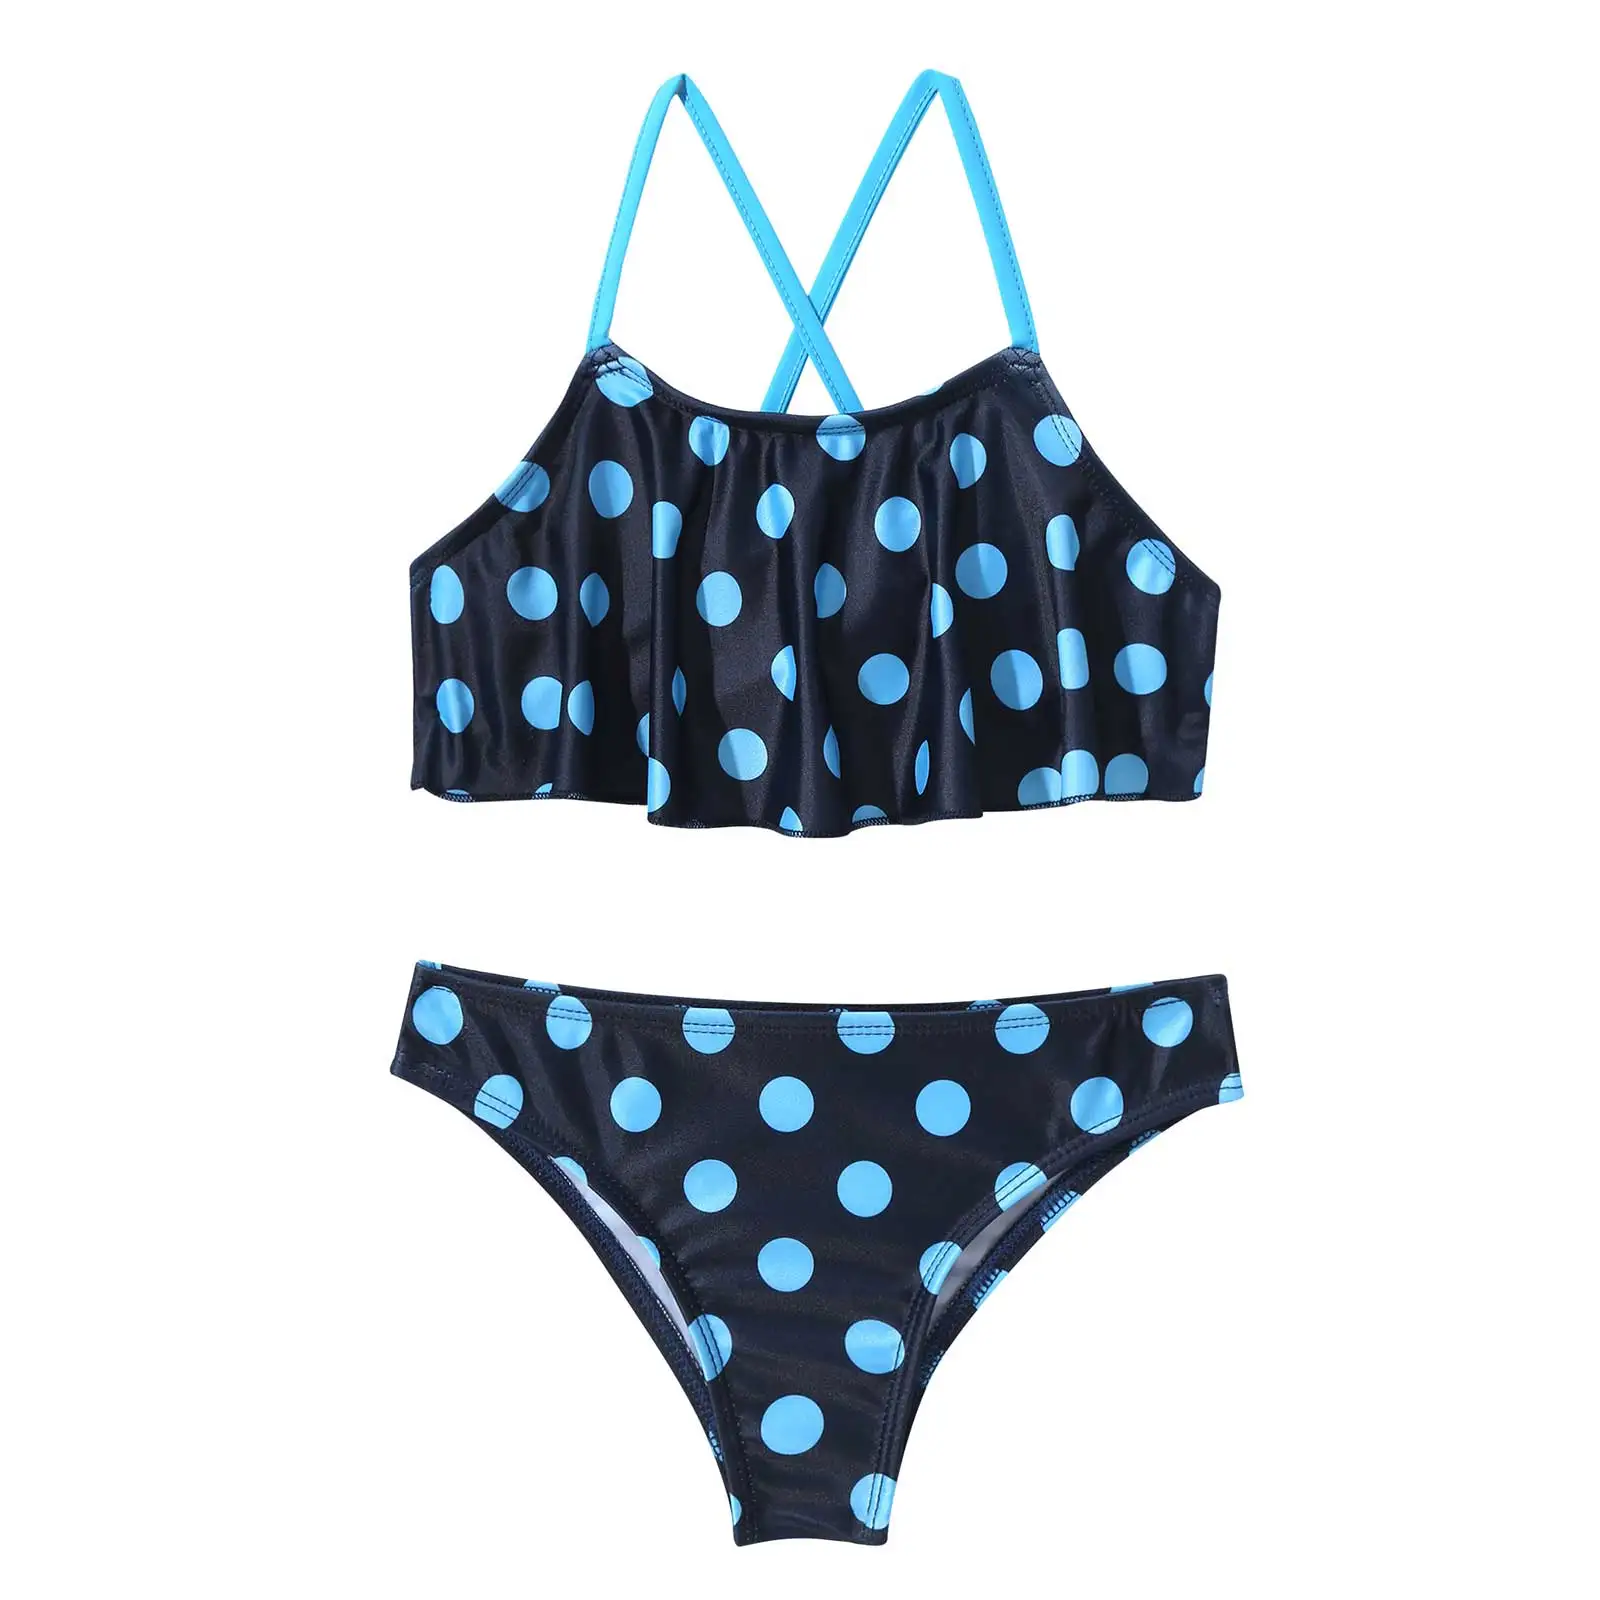 

Summer New Kids Two Pieces Swimsuit Vacation Bathing Suit Flounce Top Bikini Set Beach Wear with Small Dots for Toddler Big Girl